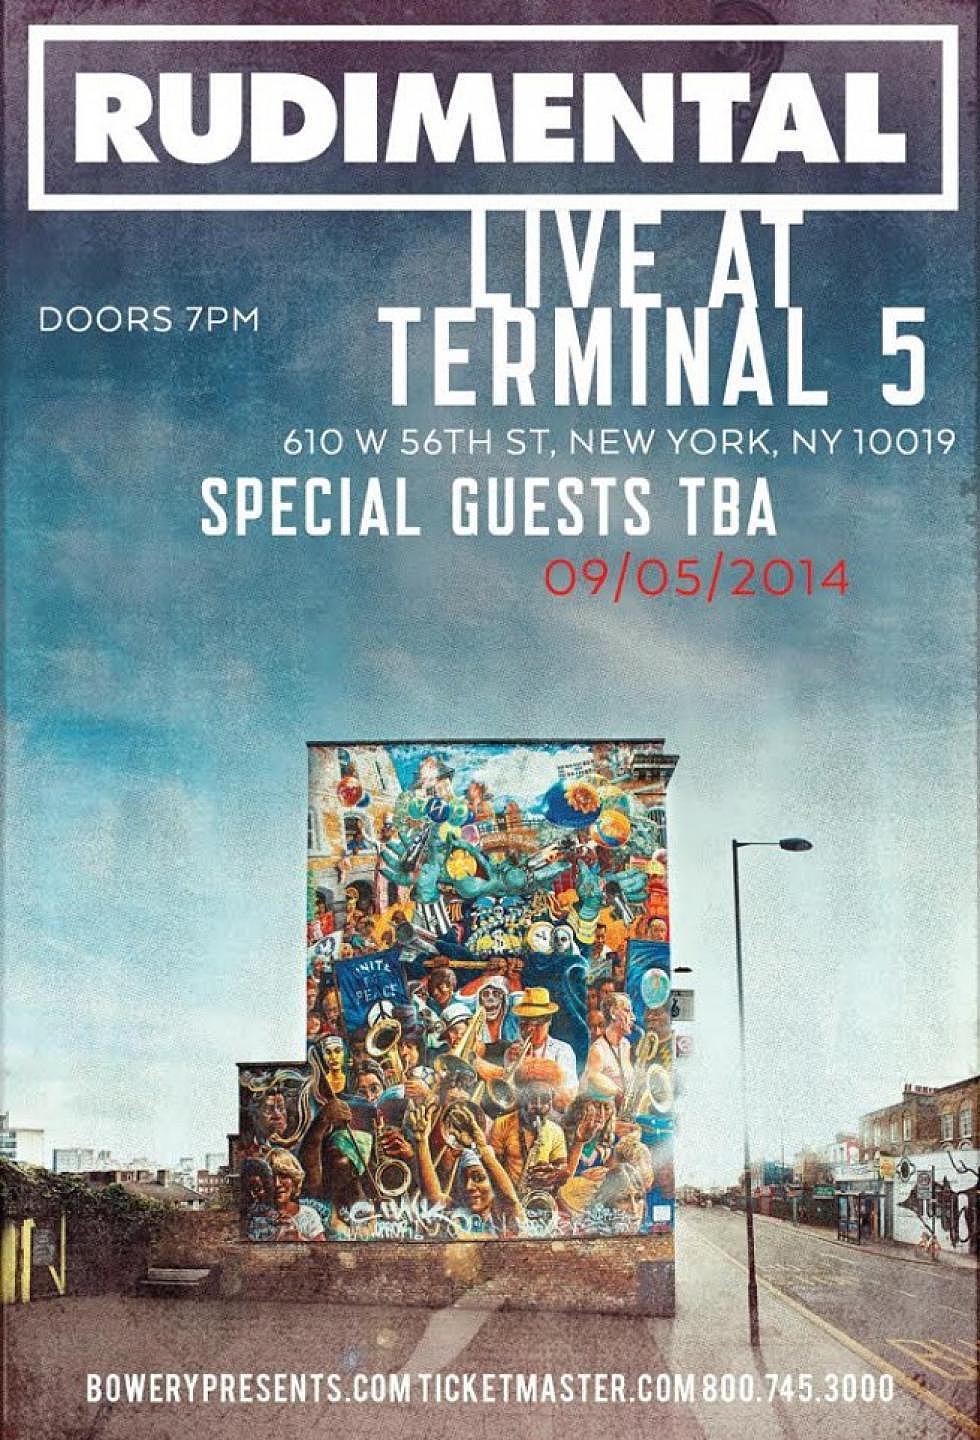 Contest: Win a pair of tickets to Rudimental @ Terminal 5 &#8211; Friday, September 5th